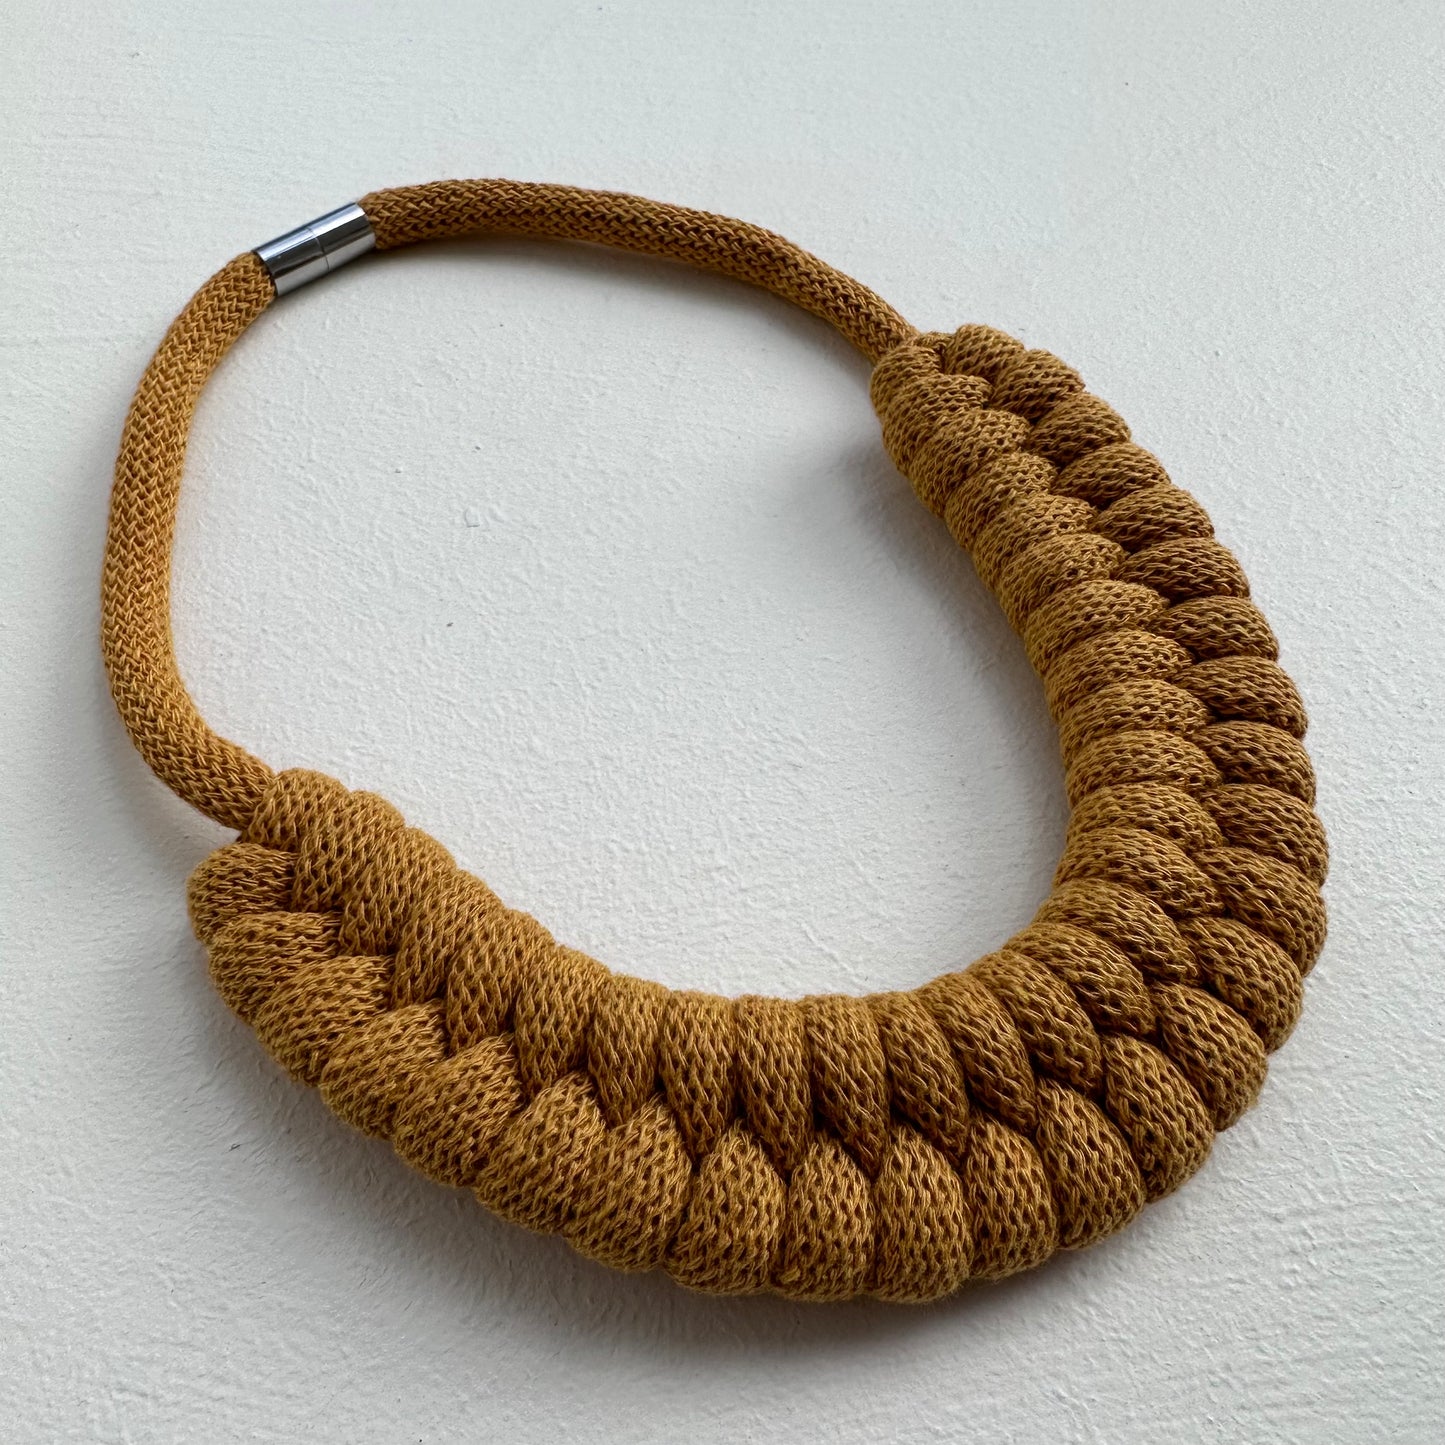 Knotted Rope Necklace